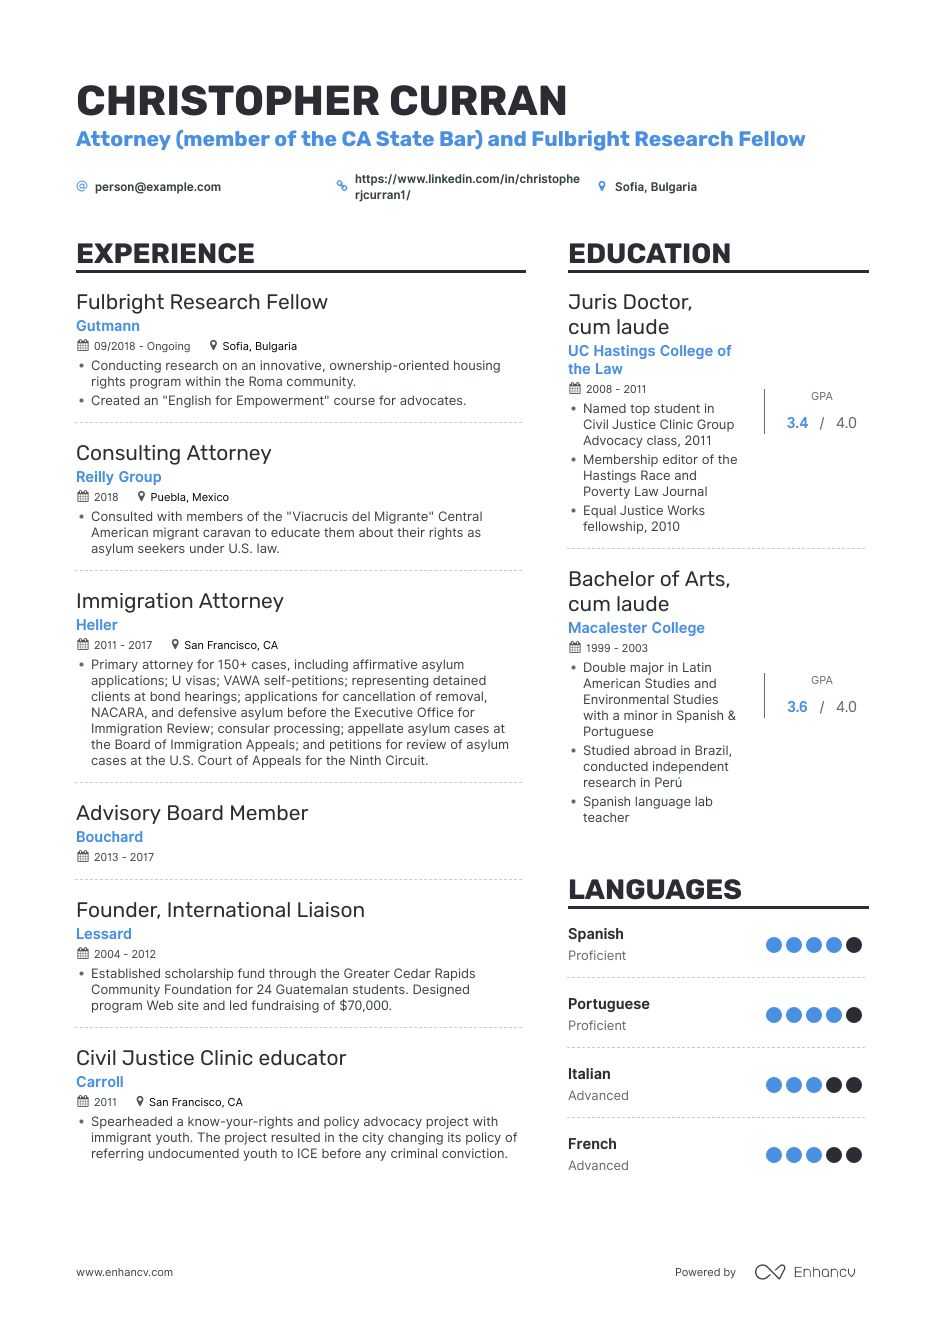 Researcher Resume Samples A Step by Step Guide for 2020